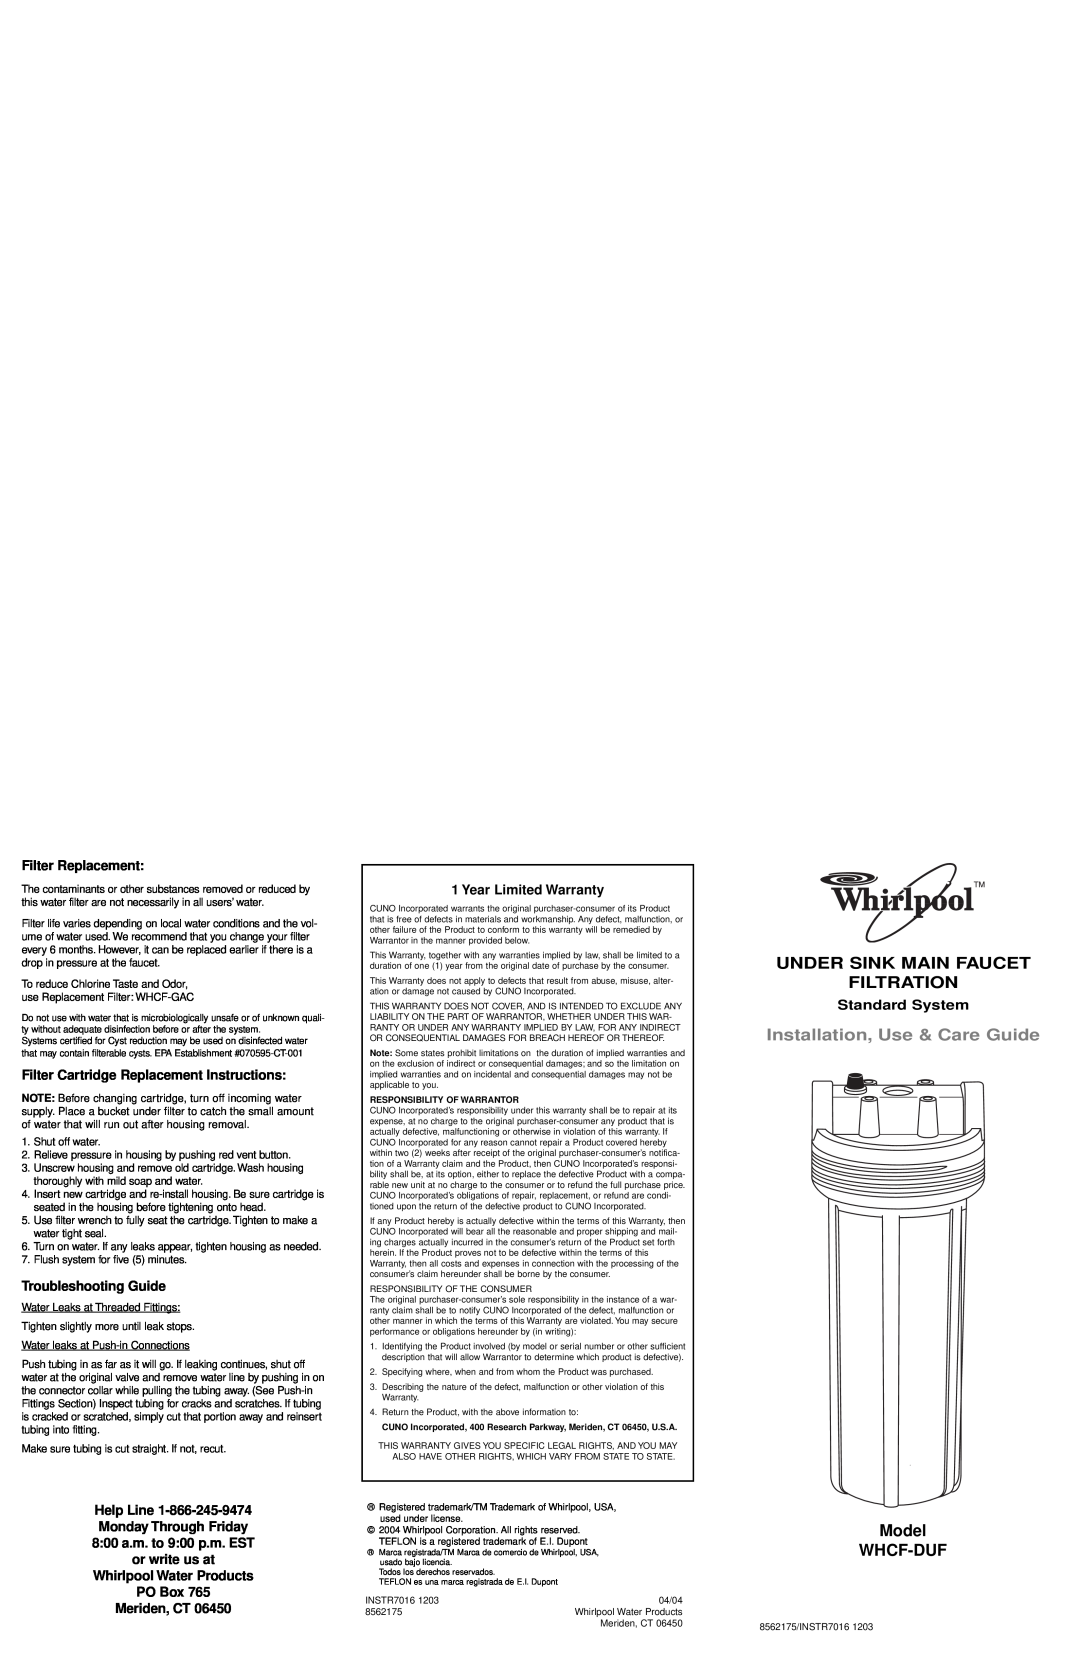 Whirlpool WHCF-DUF installation instructions Under Sink Main Faucet Filtration, Installation, Use & Care Guide 